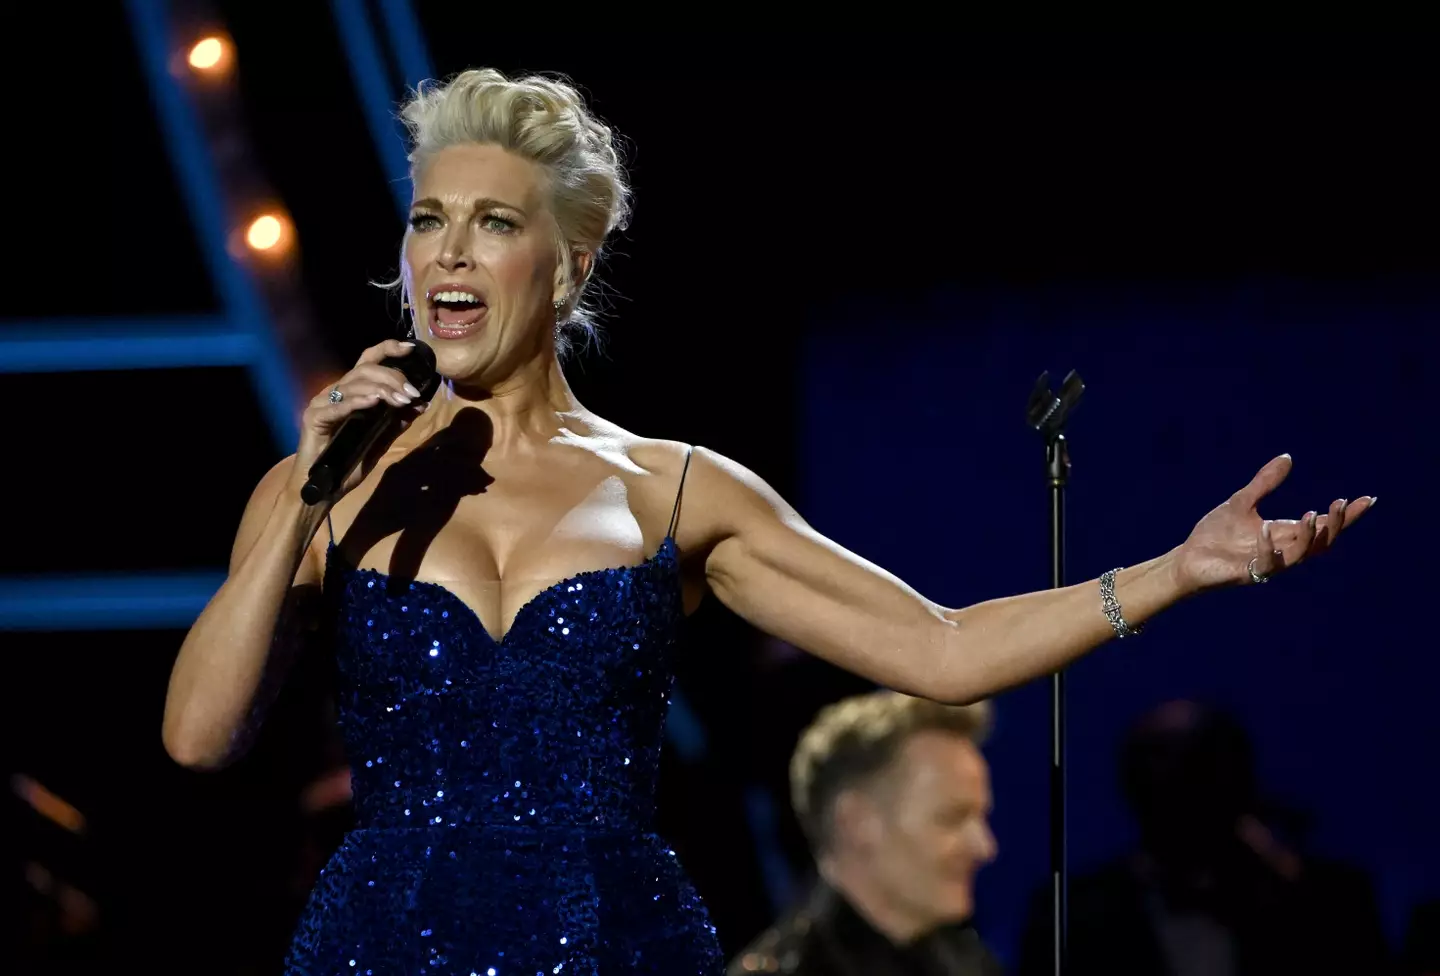 Hannah Waddingham hosted and performed at the Oliviers. (Jeff Spicer/Getty Images For SOLT)